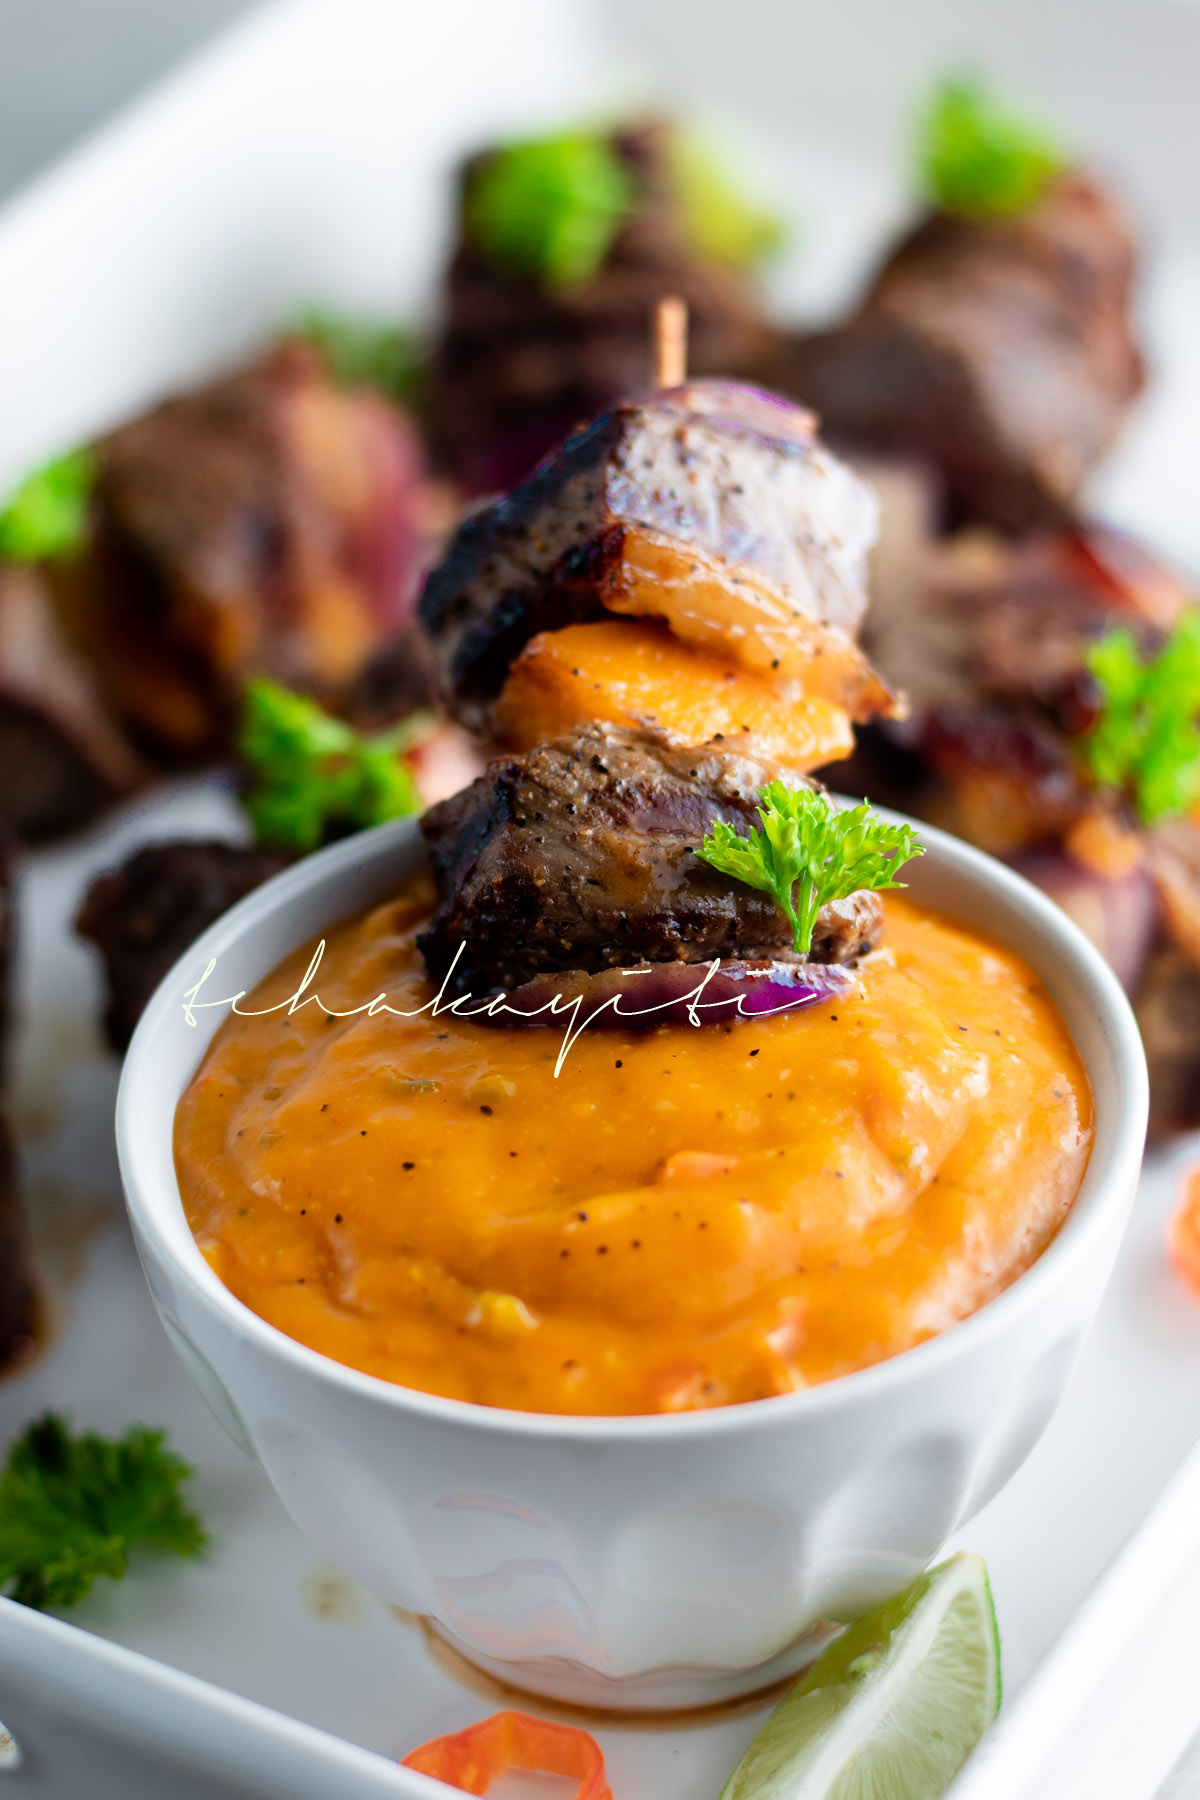 Grilled beef filet pair well with a savory mango sauce. A must have on your summer grilling list. | tchakayiti.com